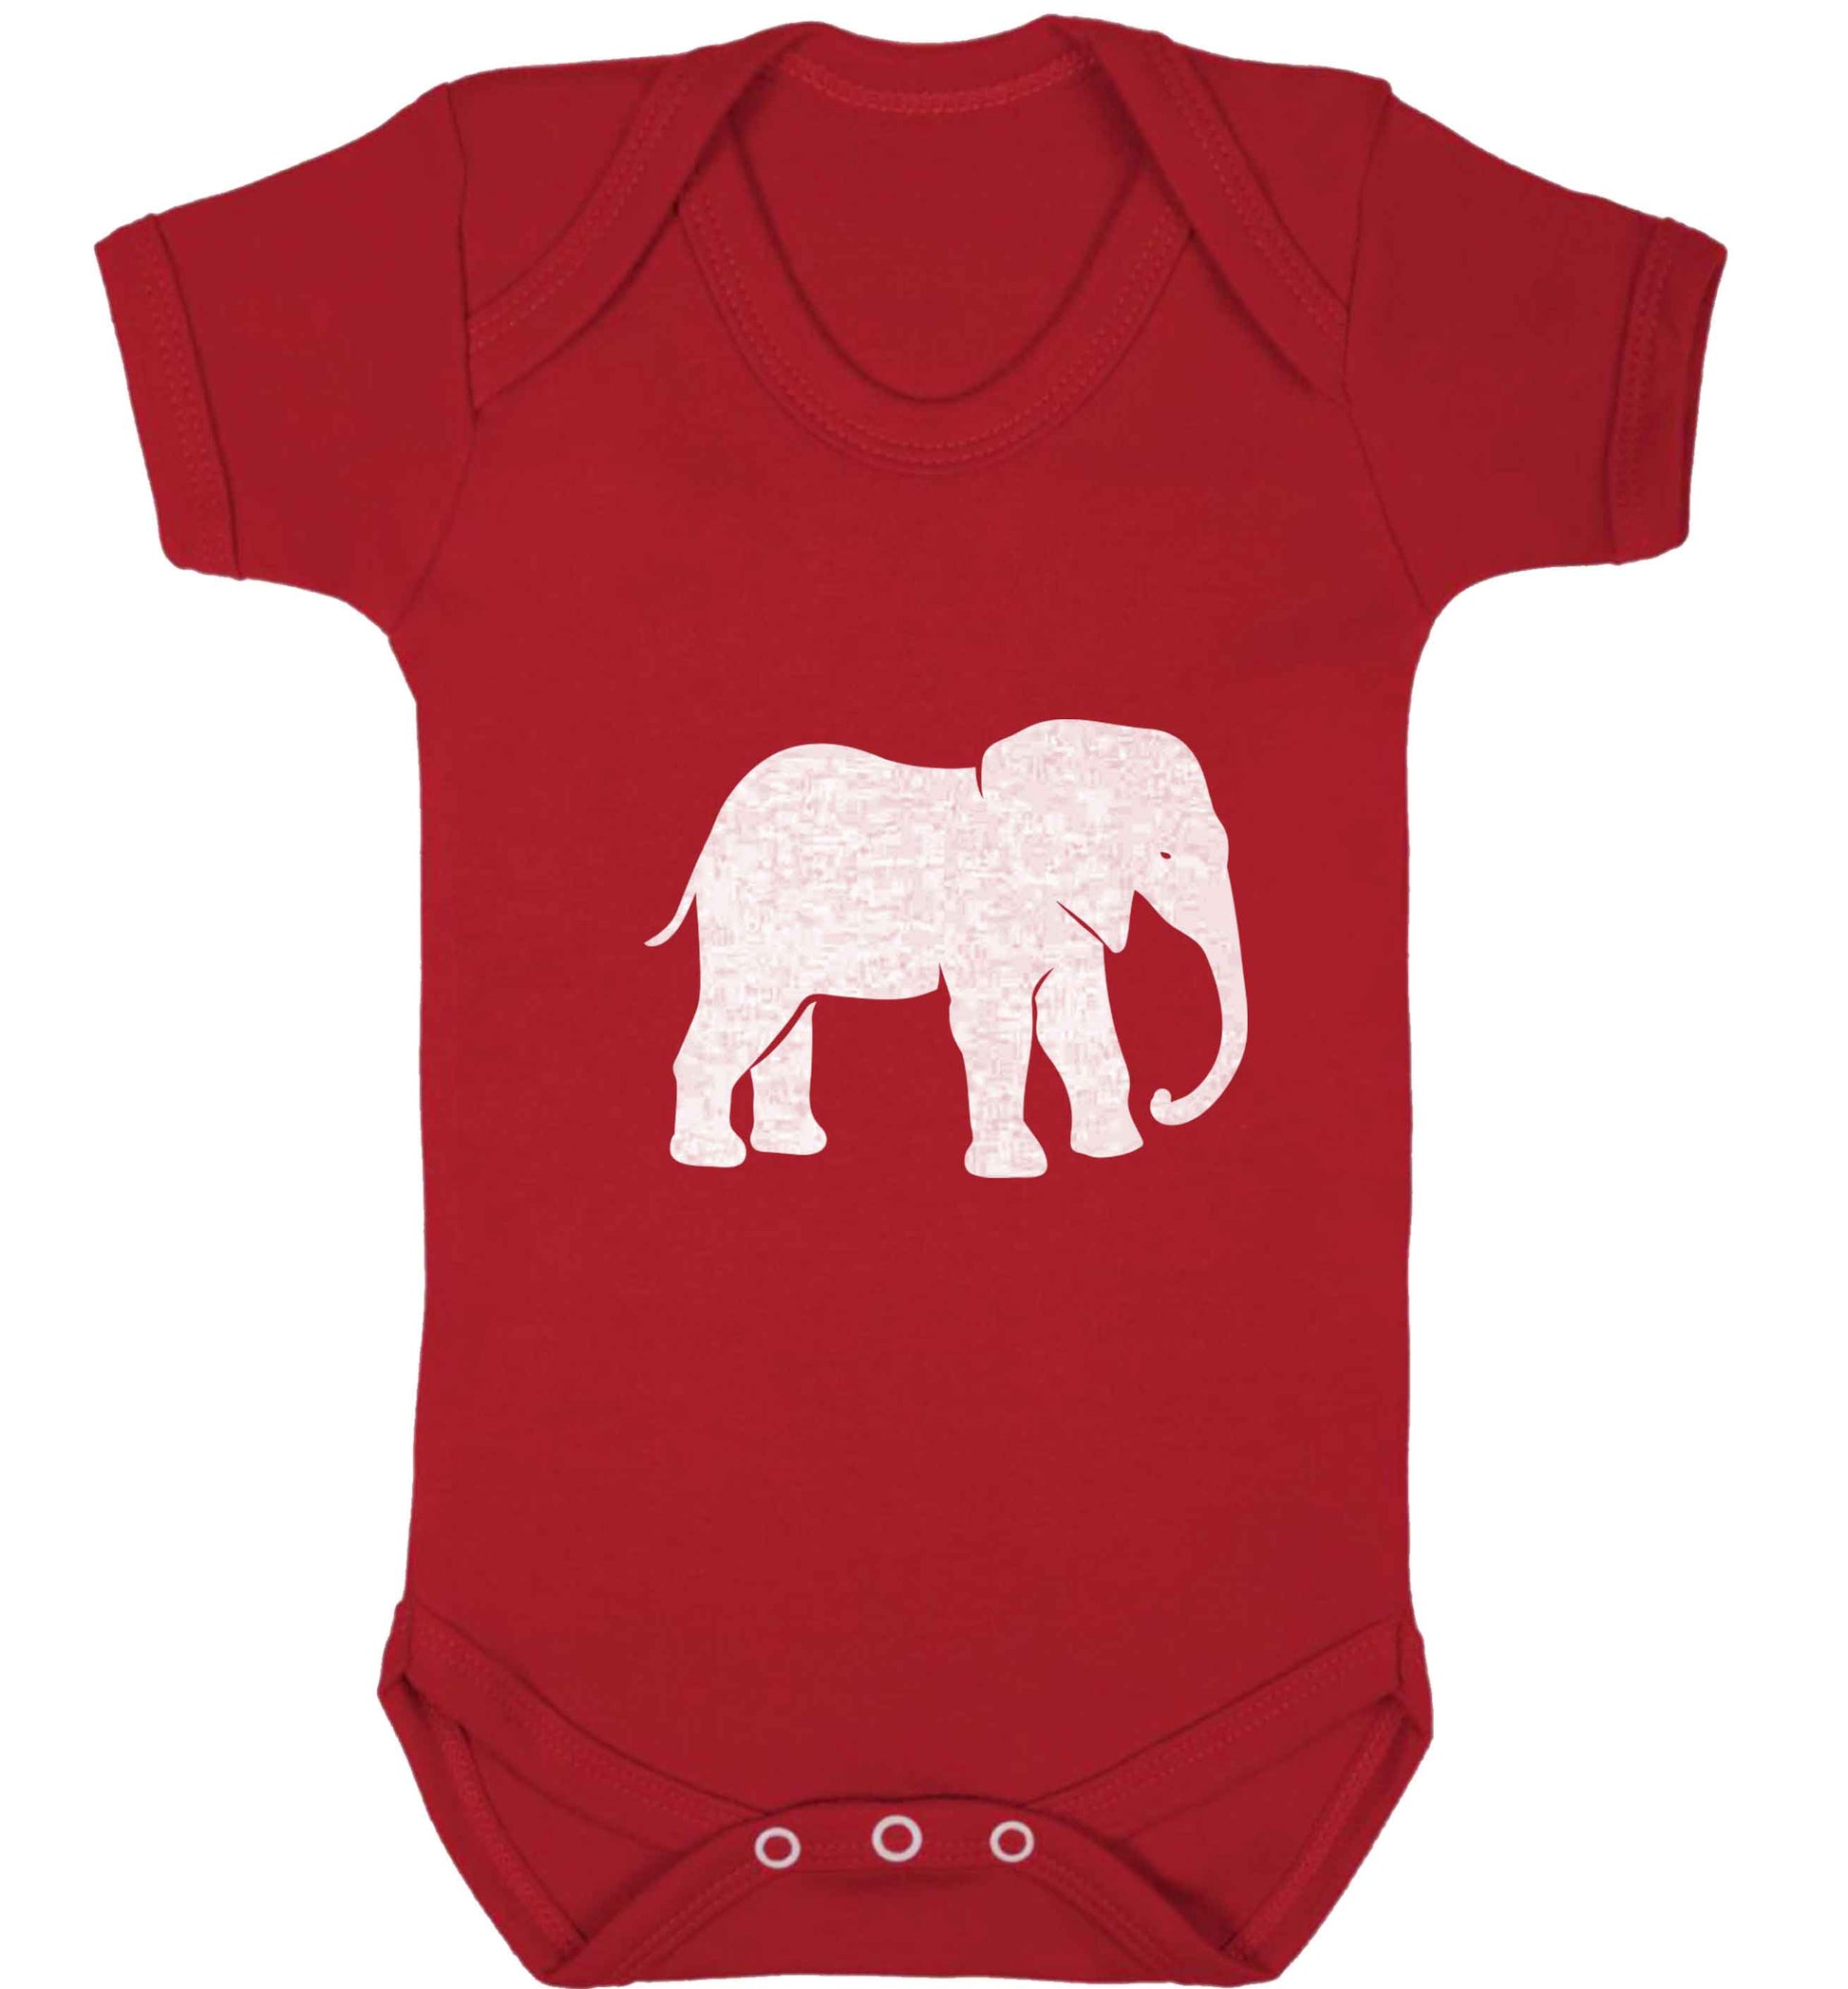 Pink elephant baby vest red 18-24 months